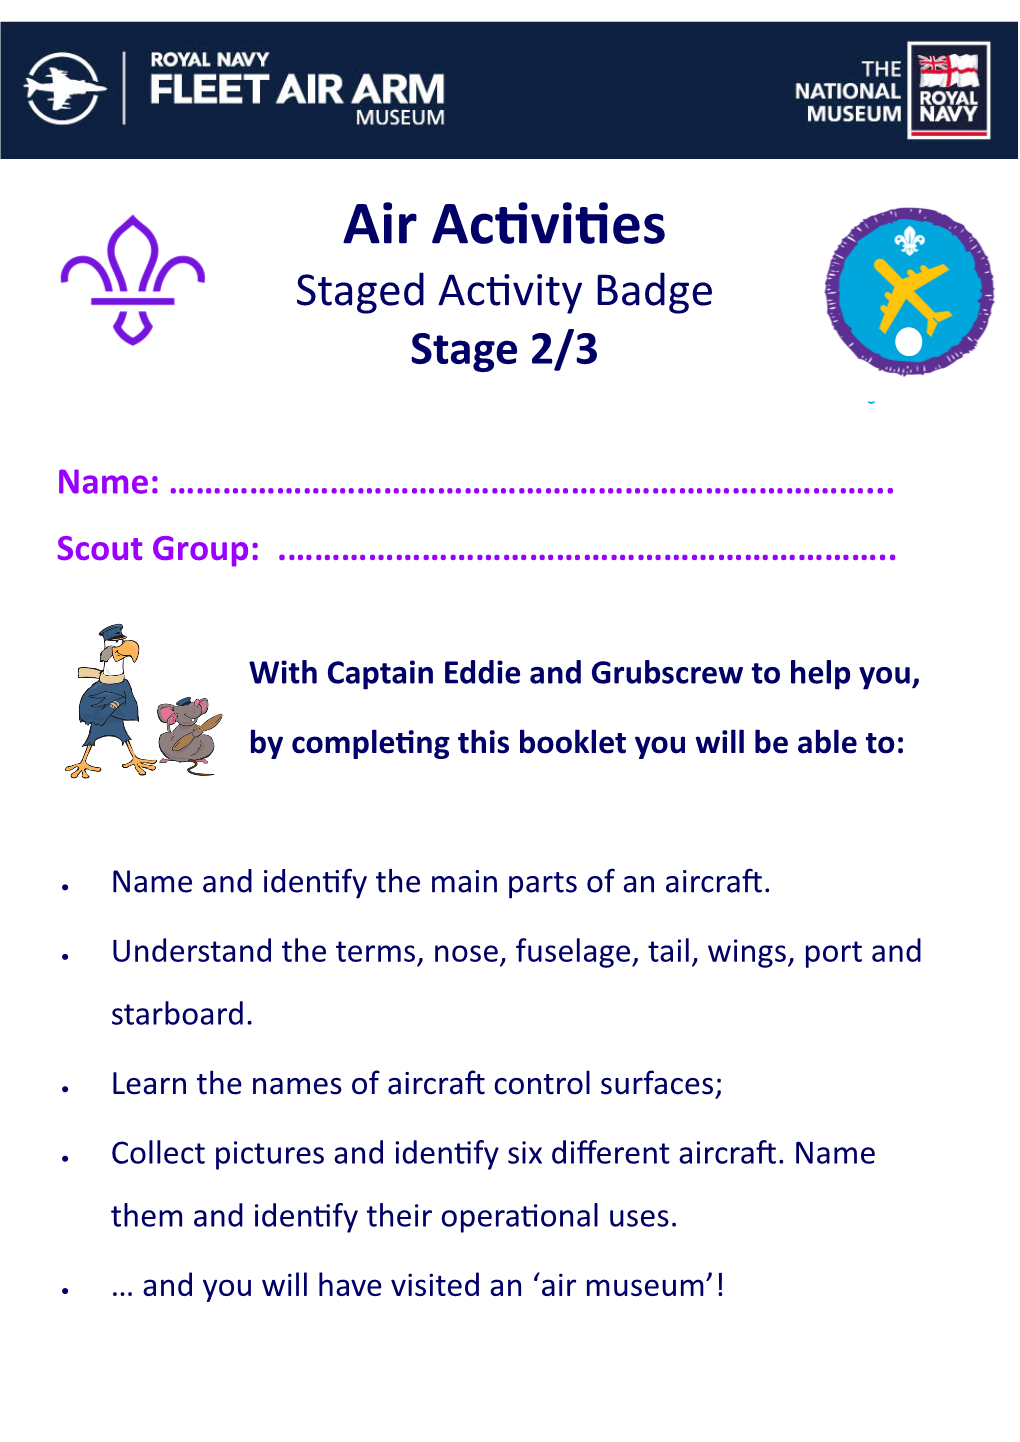 Air Activities Staged Badge